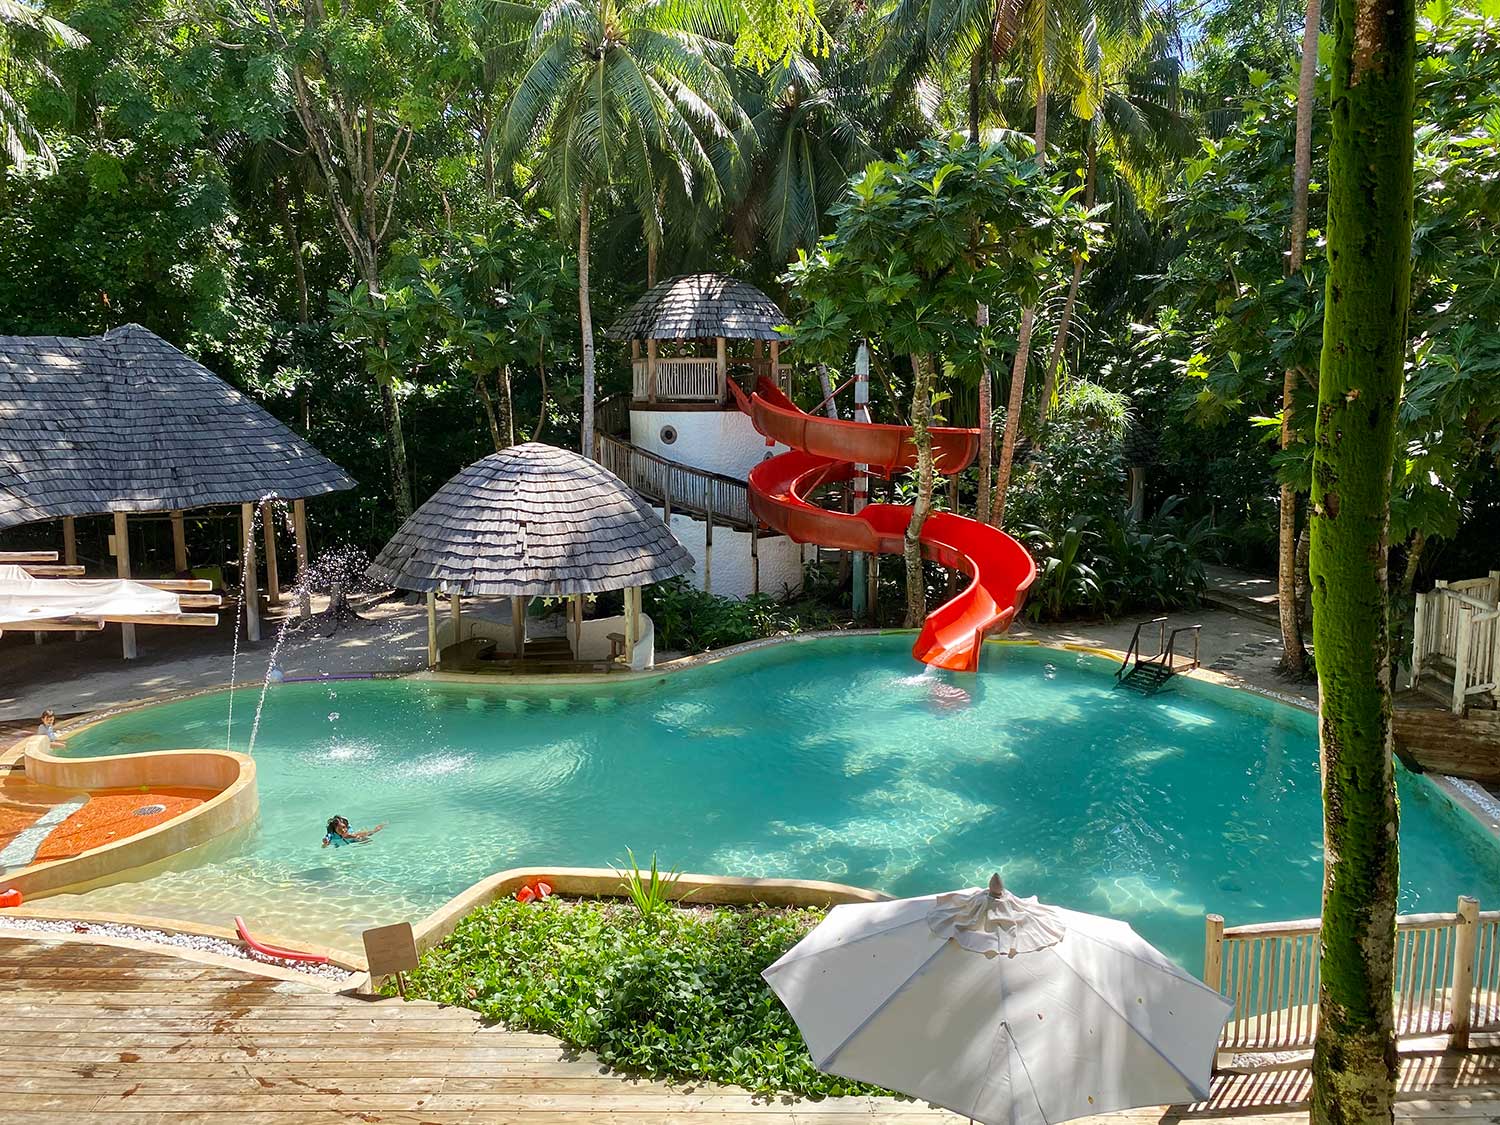 A swimming pool with a slide surrounded by lush greenery.